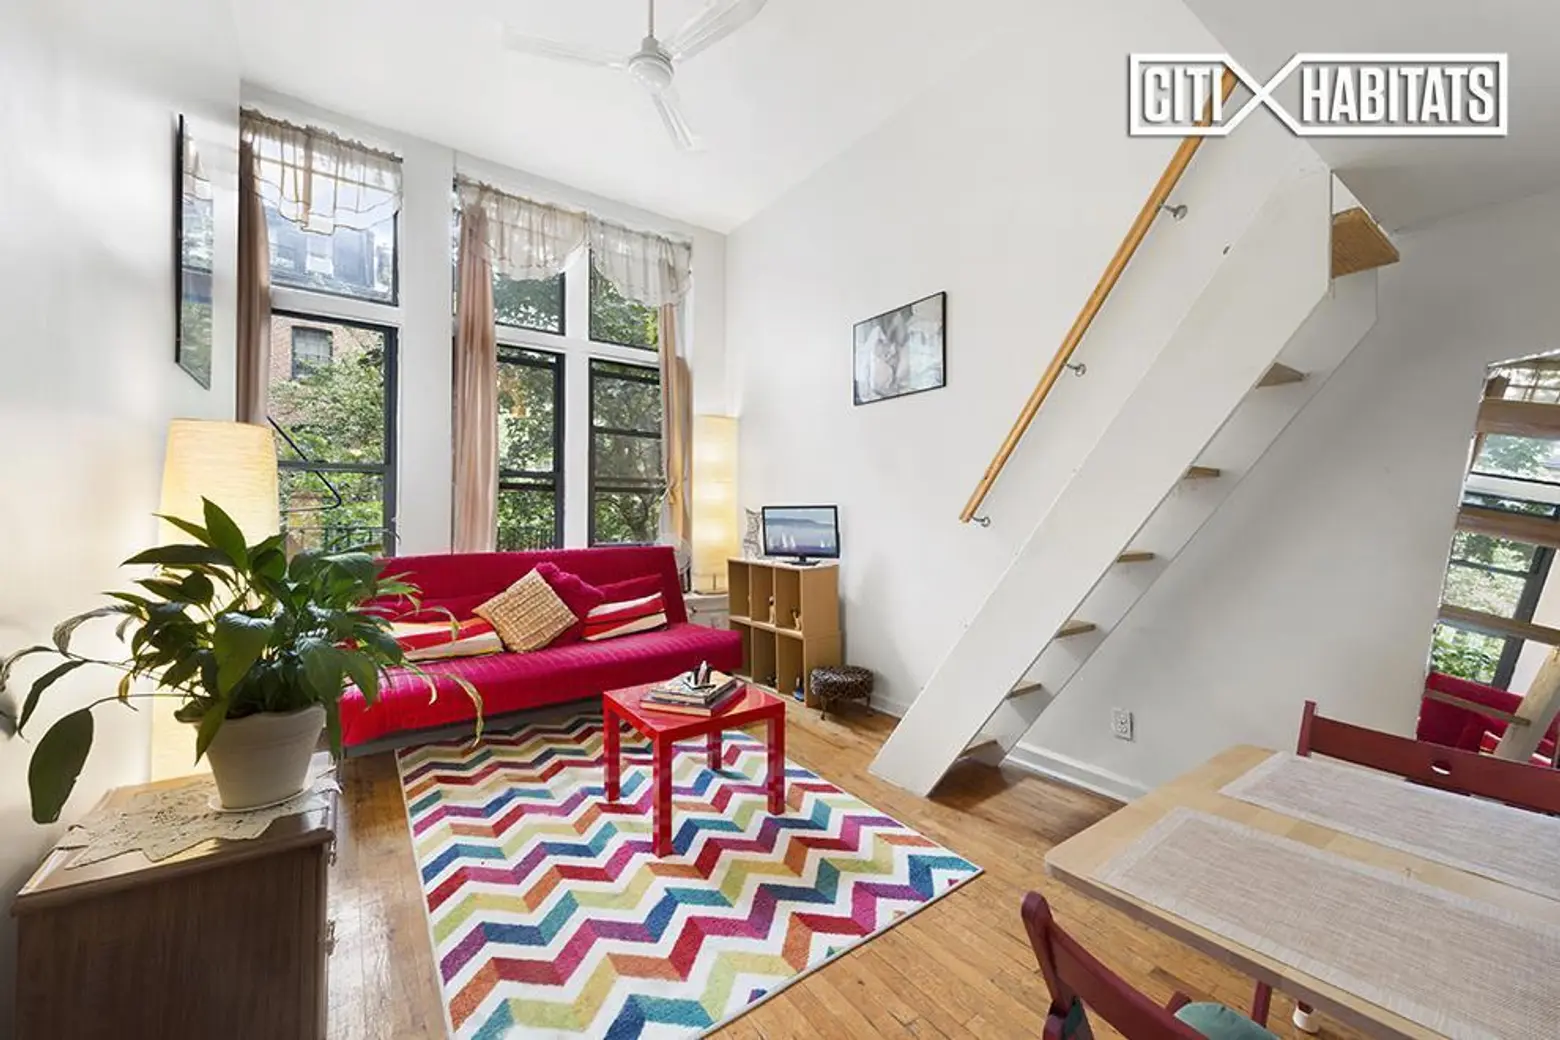 Two bright, lofted co-ops in the West Village hit the market together for $1.599M